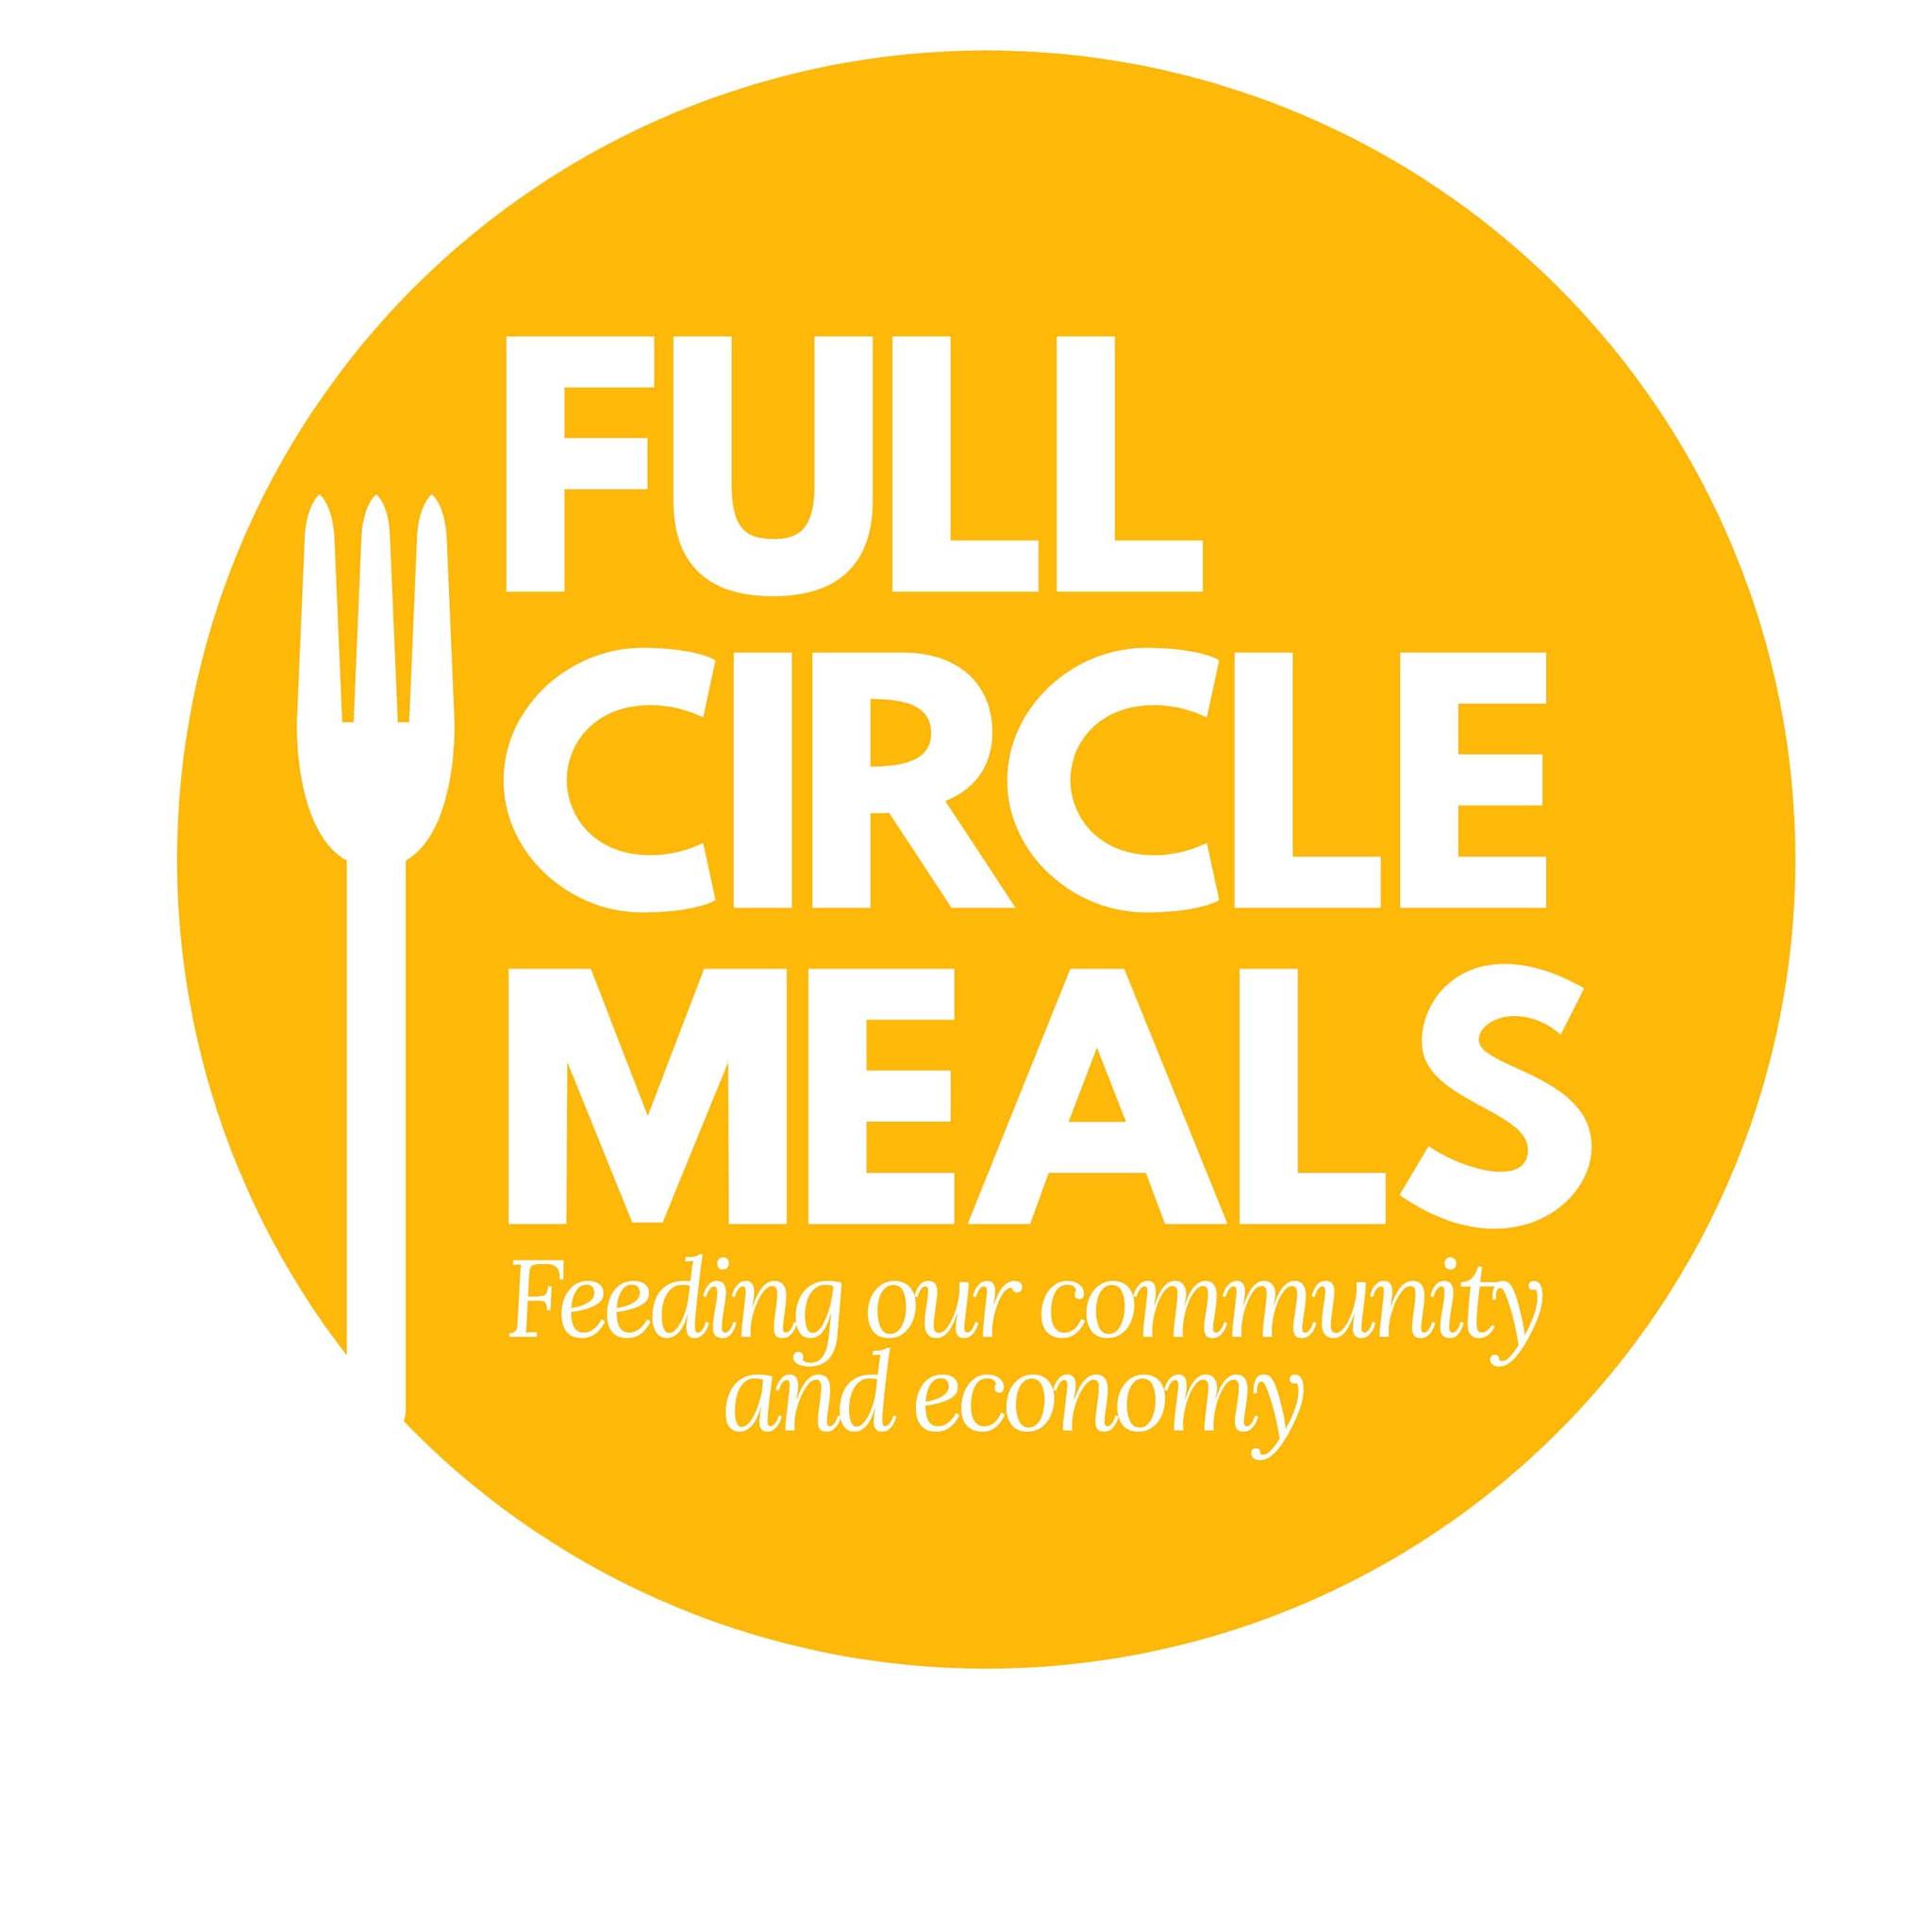 The Full Circle Meals project has prepared and delivered over 1,000 meals.